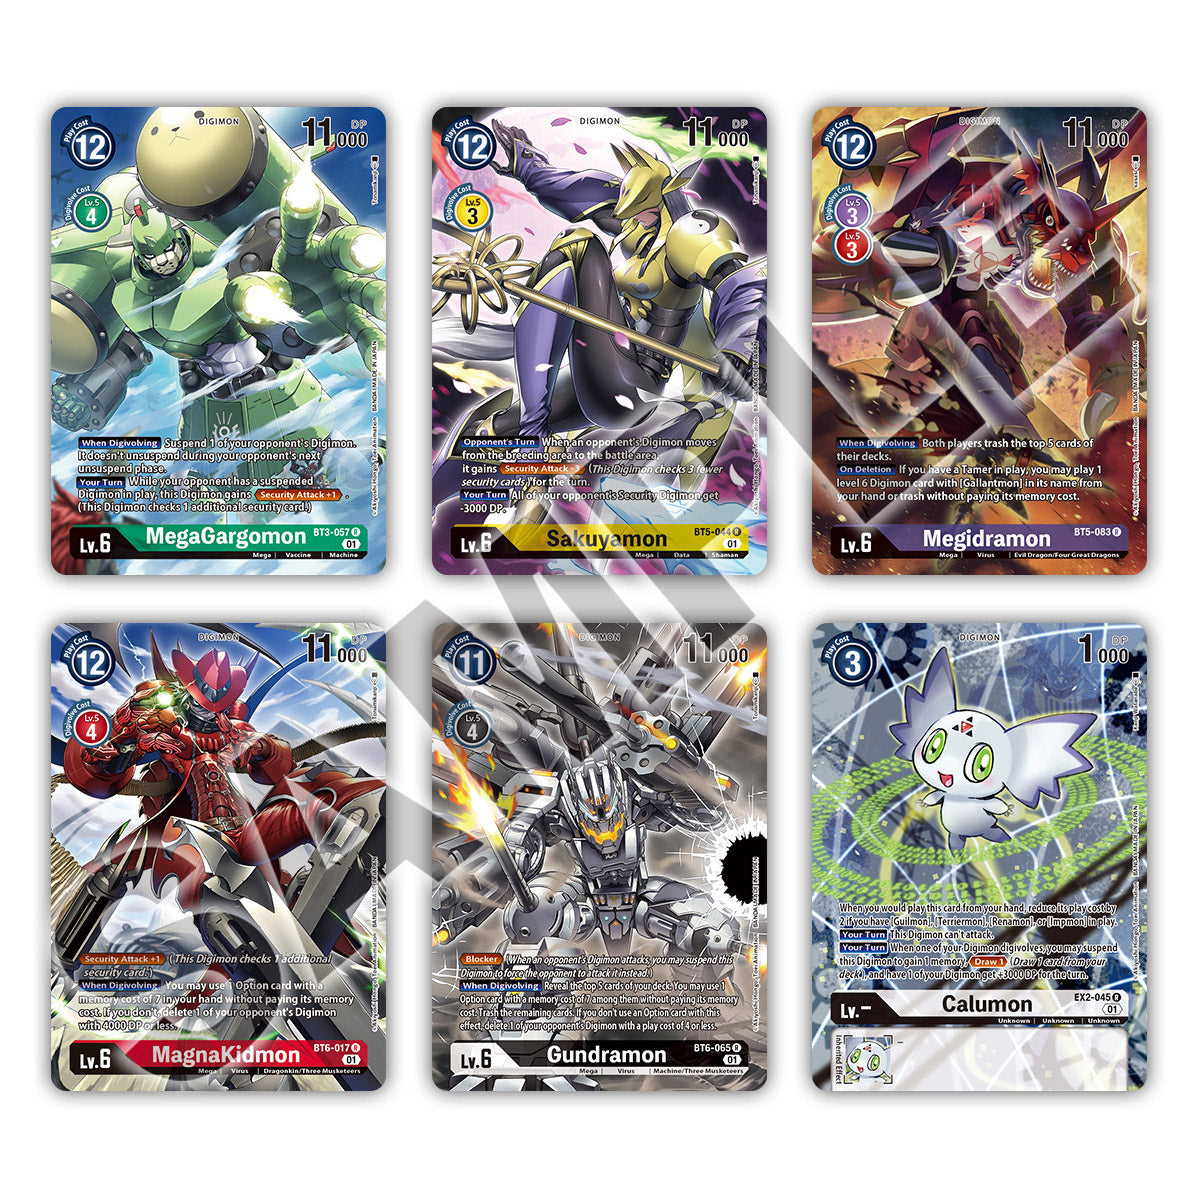 Digimon Card Game Deck Box and Card Set Beelzemon